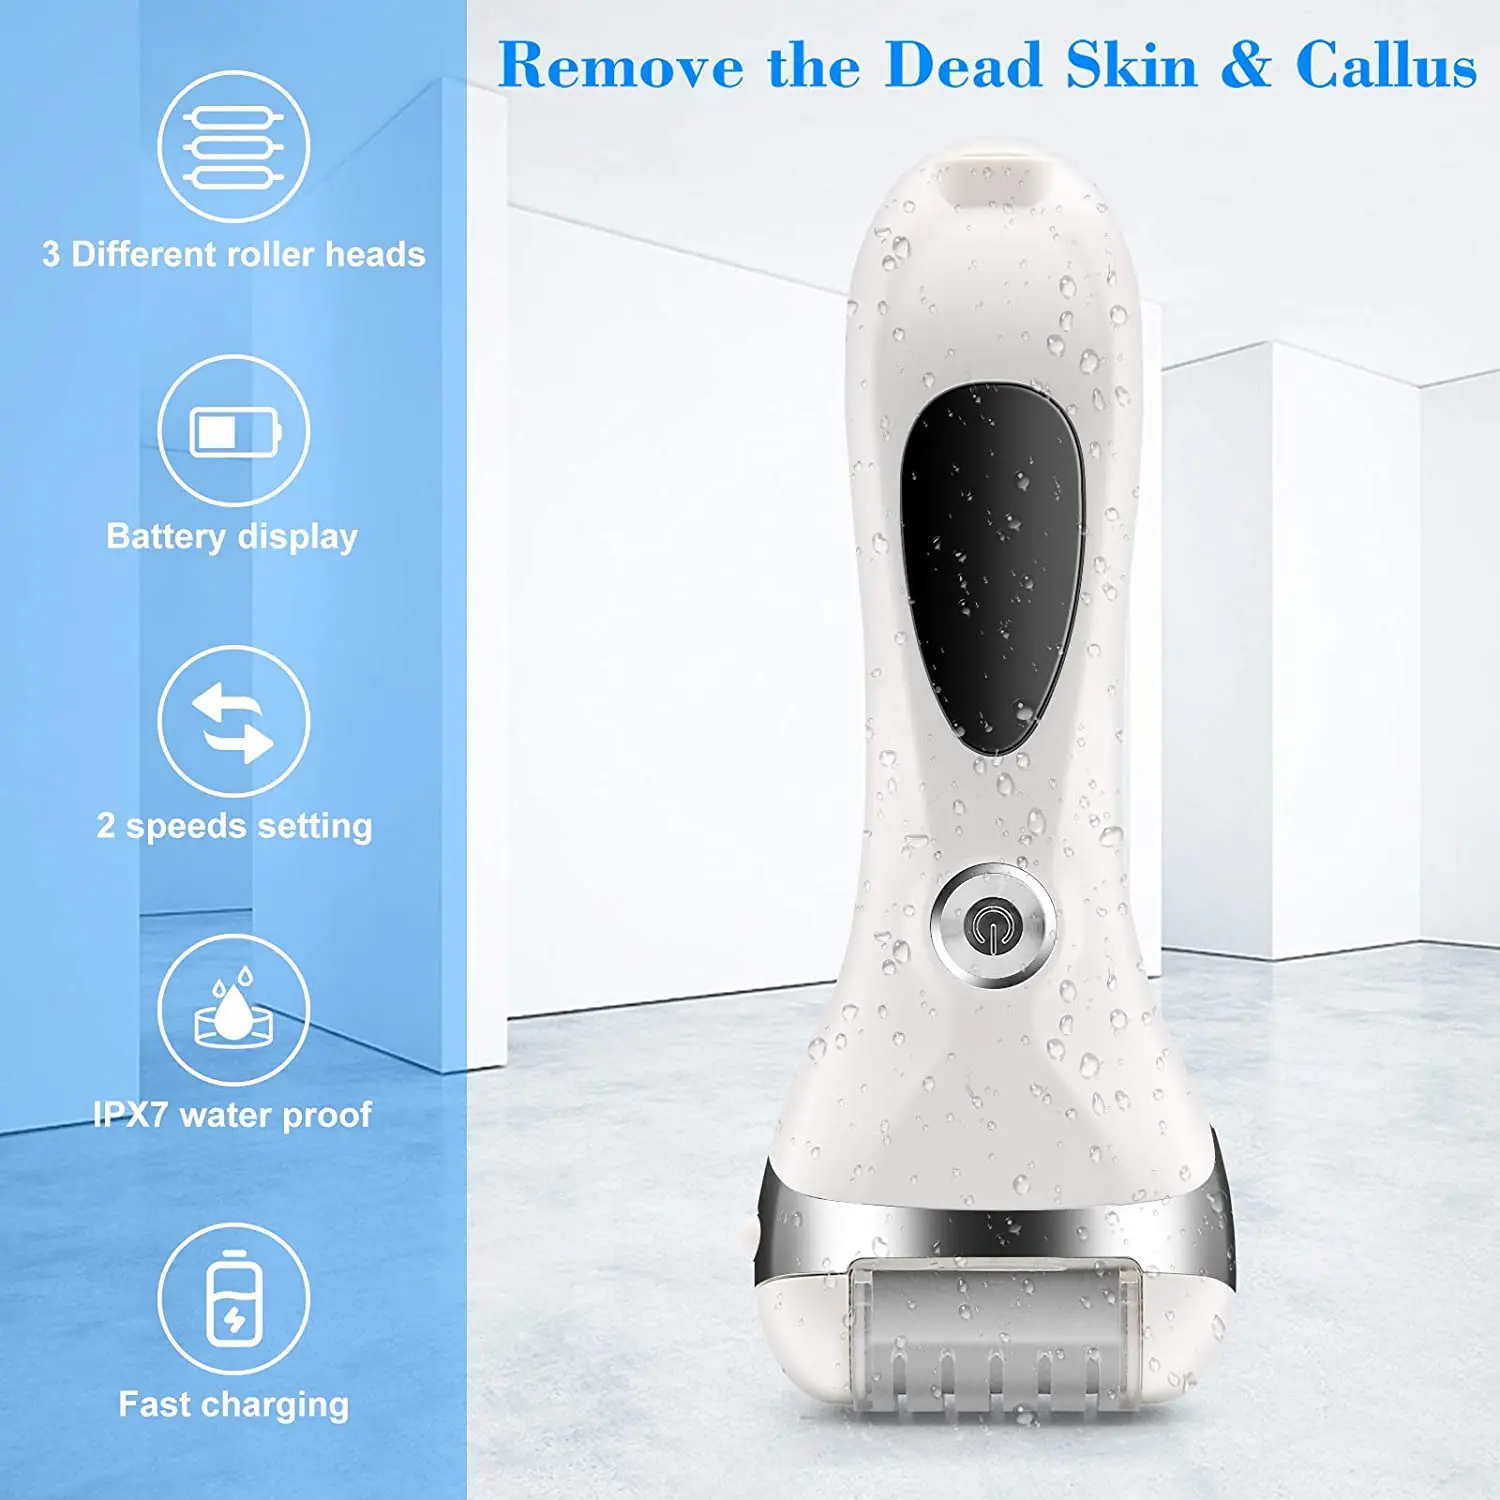 https://ae01.alicdn.com/kf/Hd5dba600992247f4bf38f8619b06b5b2x/Electric-Foot-Callus-Remover-13-in-1-Rechargeable-Professional-Foot-Pedicure-Kit-Waterproof-Hard-Skin-Remover.jpg